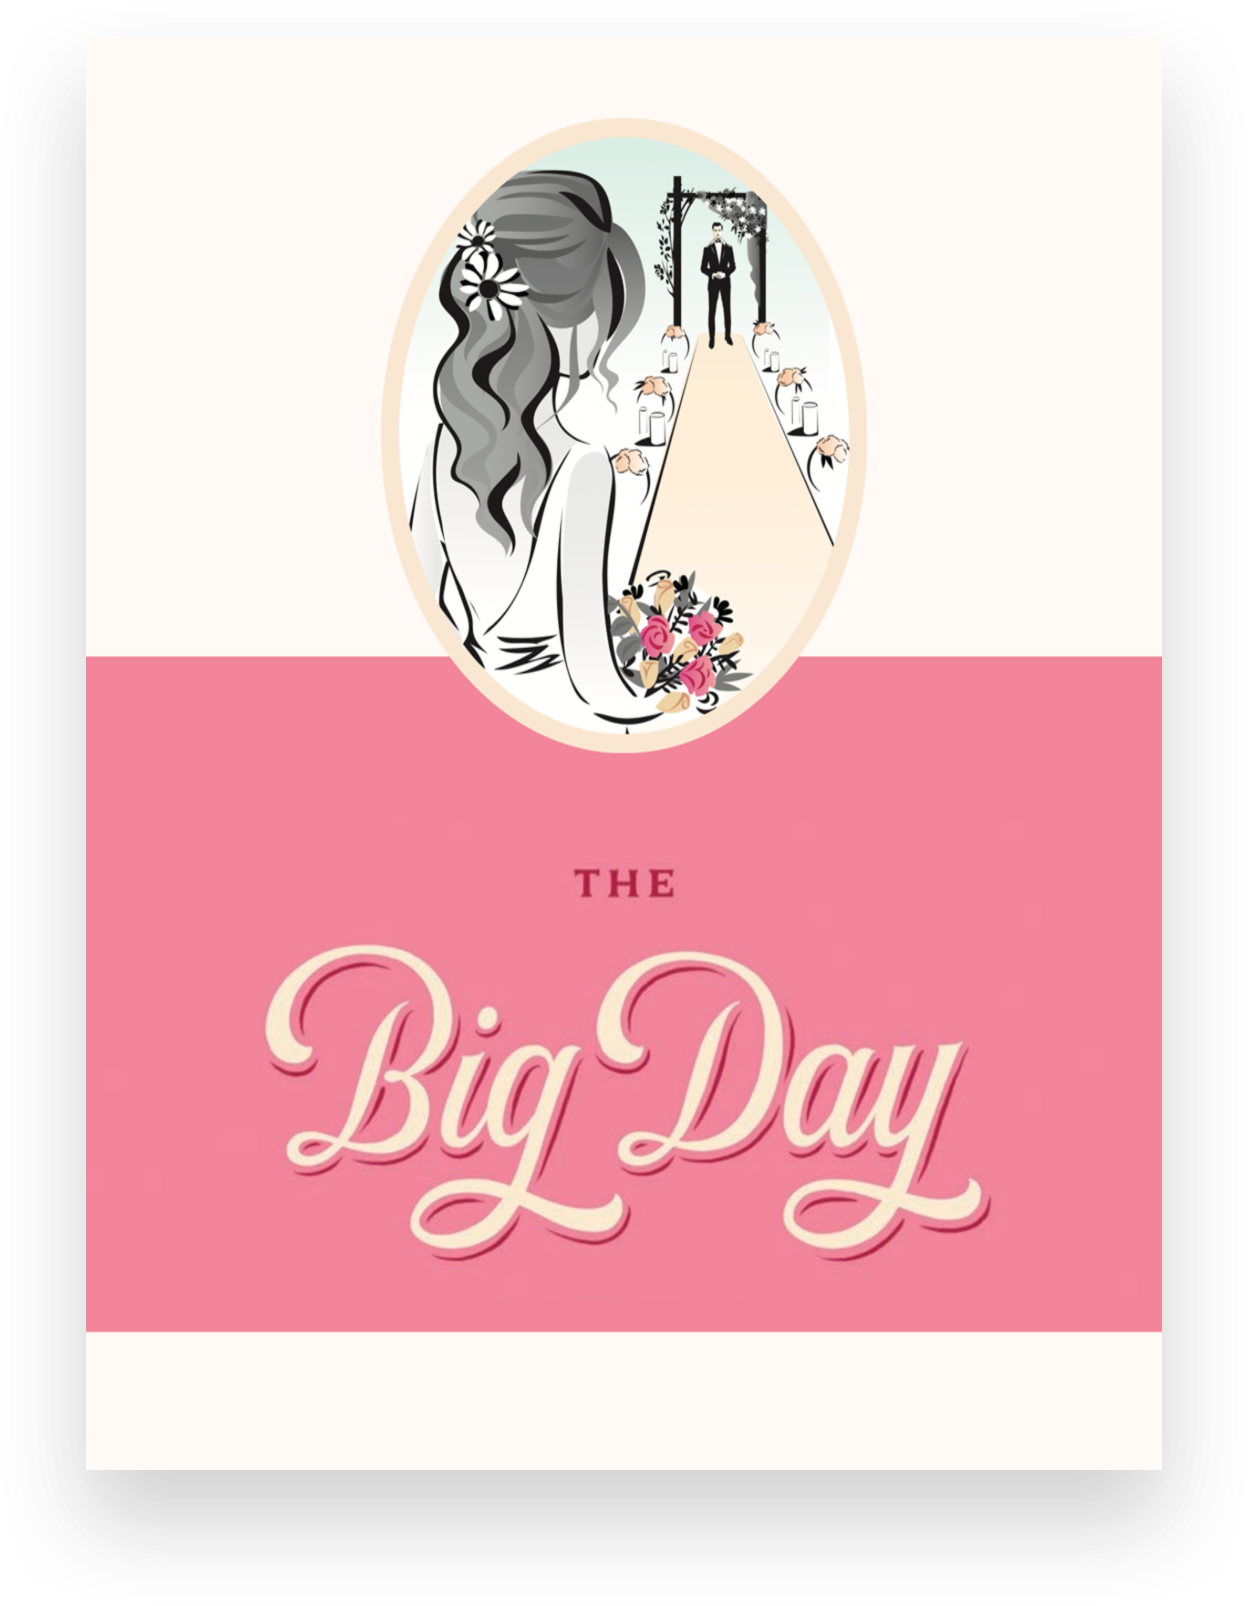 Workbook Chapter 7 - The Big Day